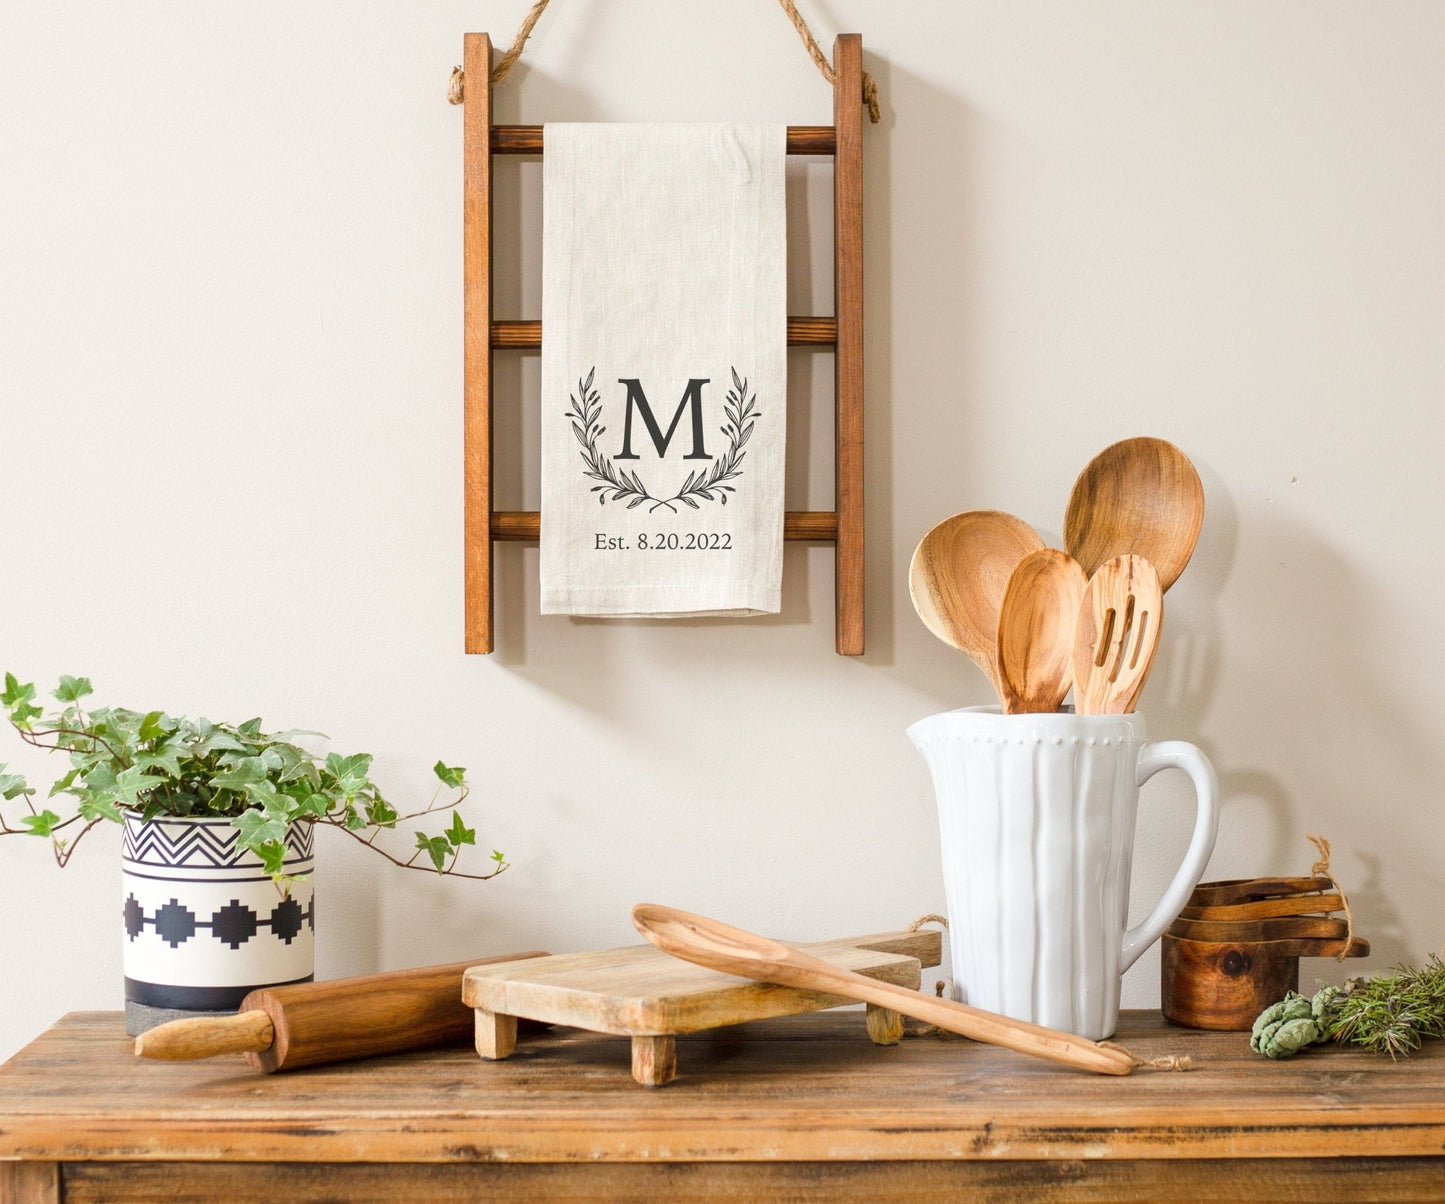 Family Initial Monogrammed Kitchen Tea Towel With Date | Bridal Shower Gift | Housewarming Gift Tea Towel | Personalized Kitchen Tea Towel